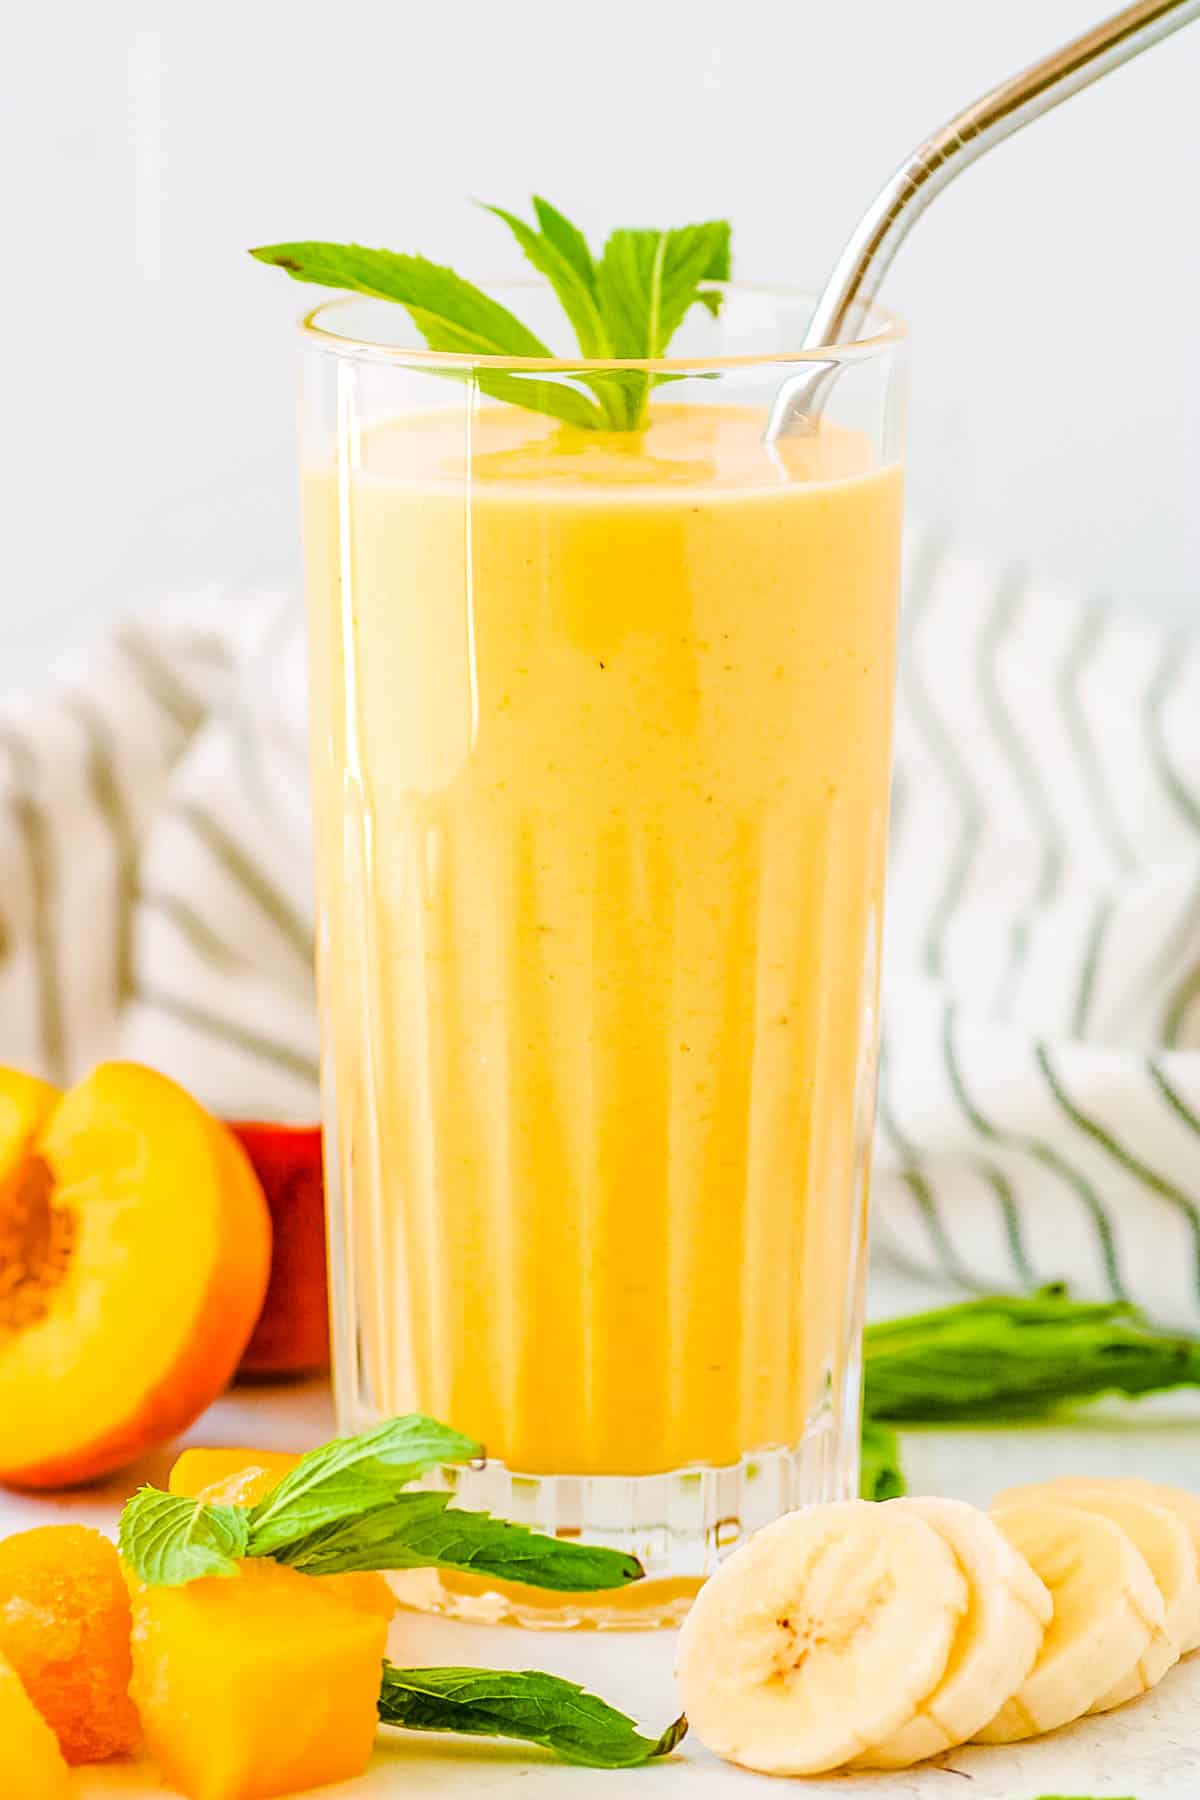 Banana peach smoothie served in a glass with a straw and mint leaves as a garnish.